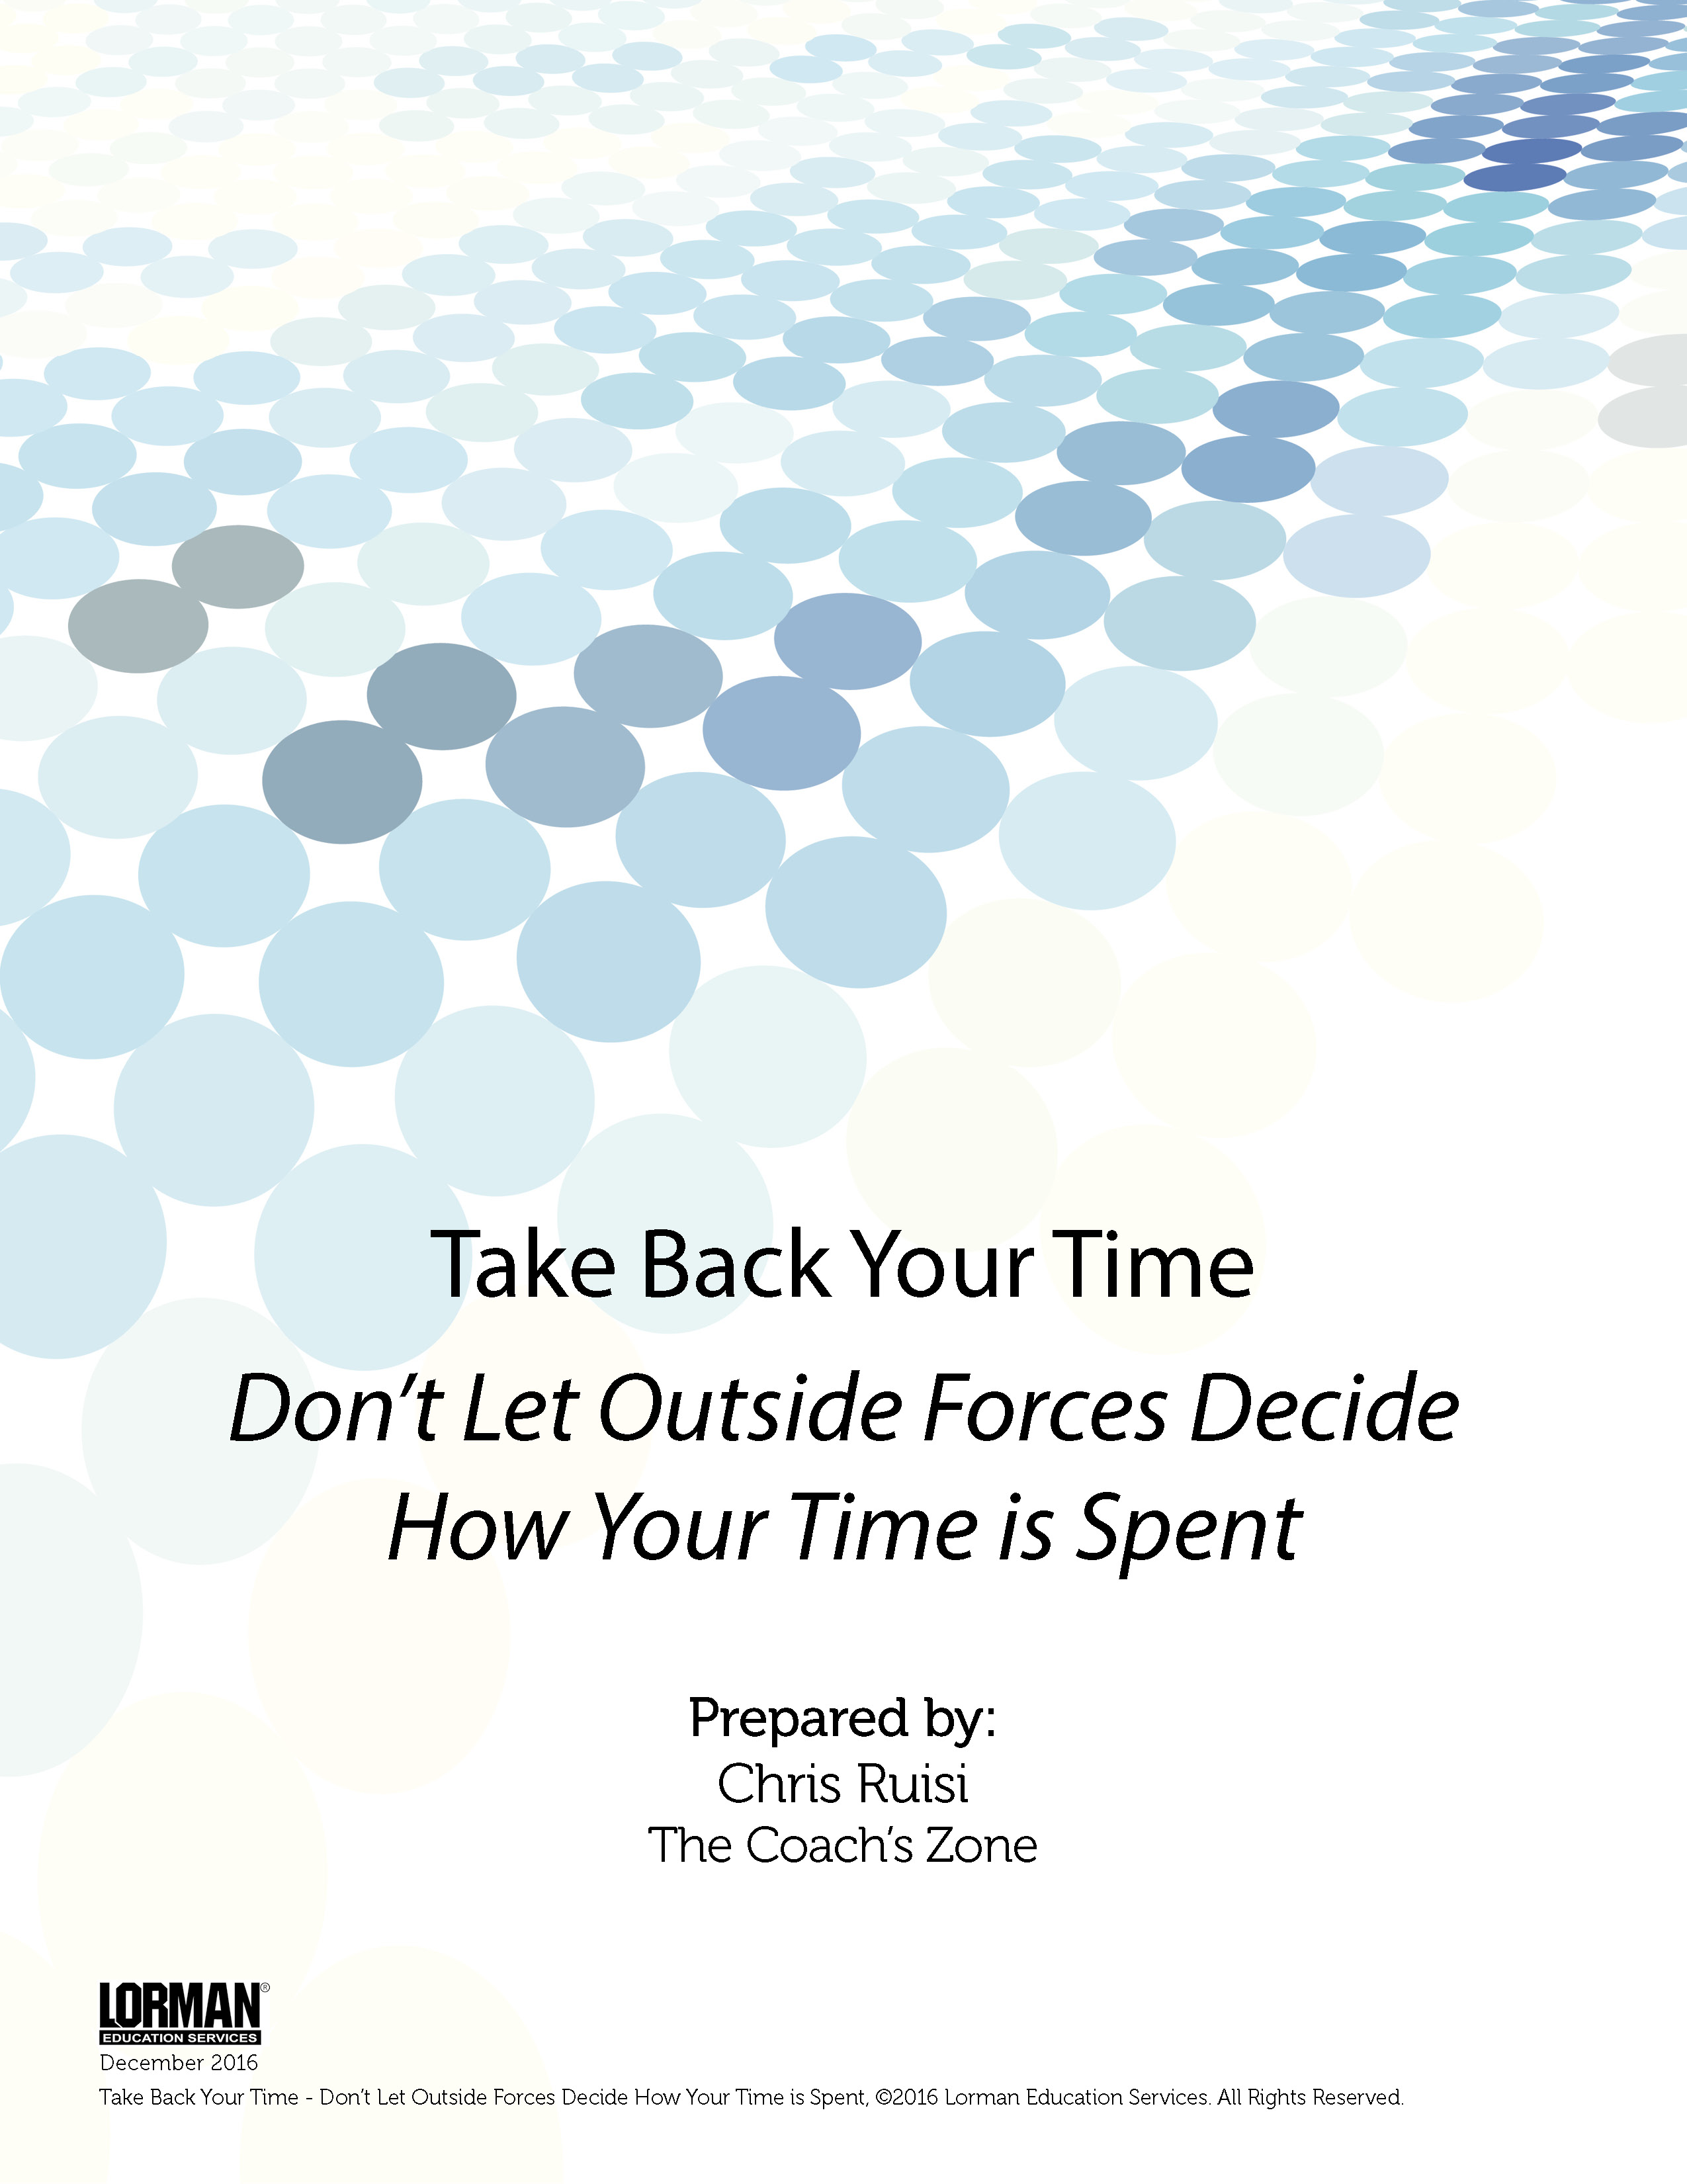 Take Back Your Time - Don't Let Outside Forces Decide How Your Time is Spent